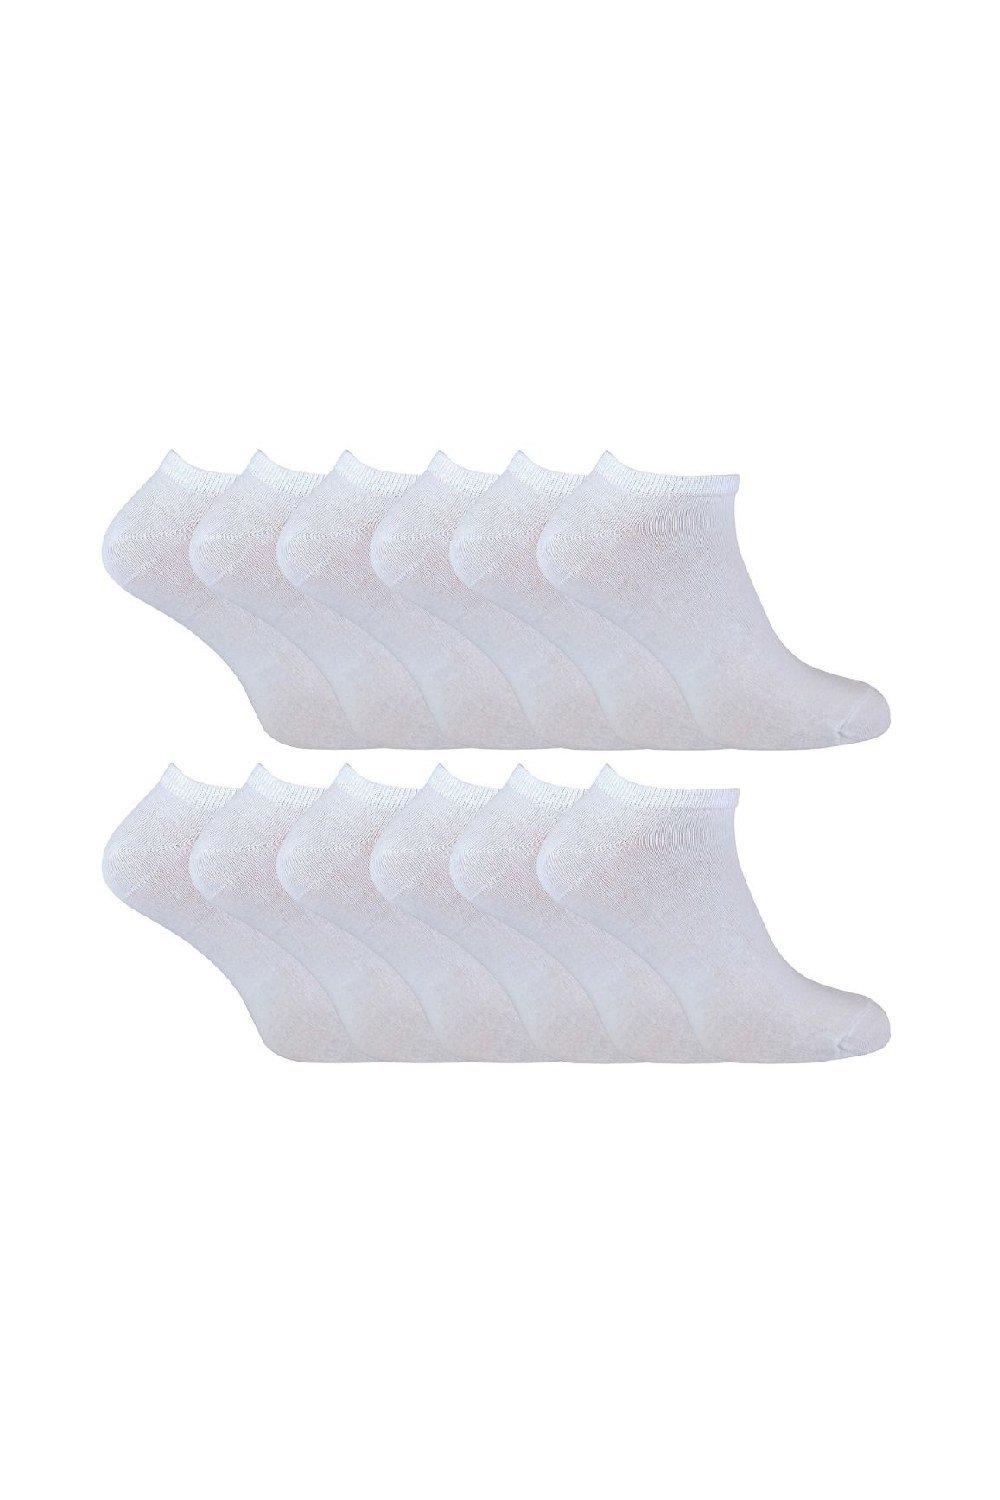 12 Pairs Soft Cotton Breathable Trainer Socks